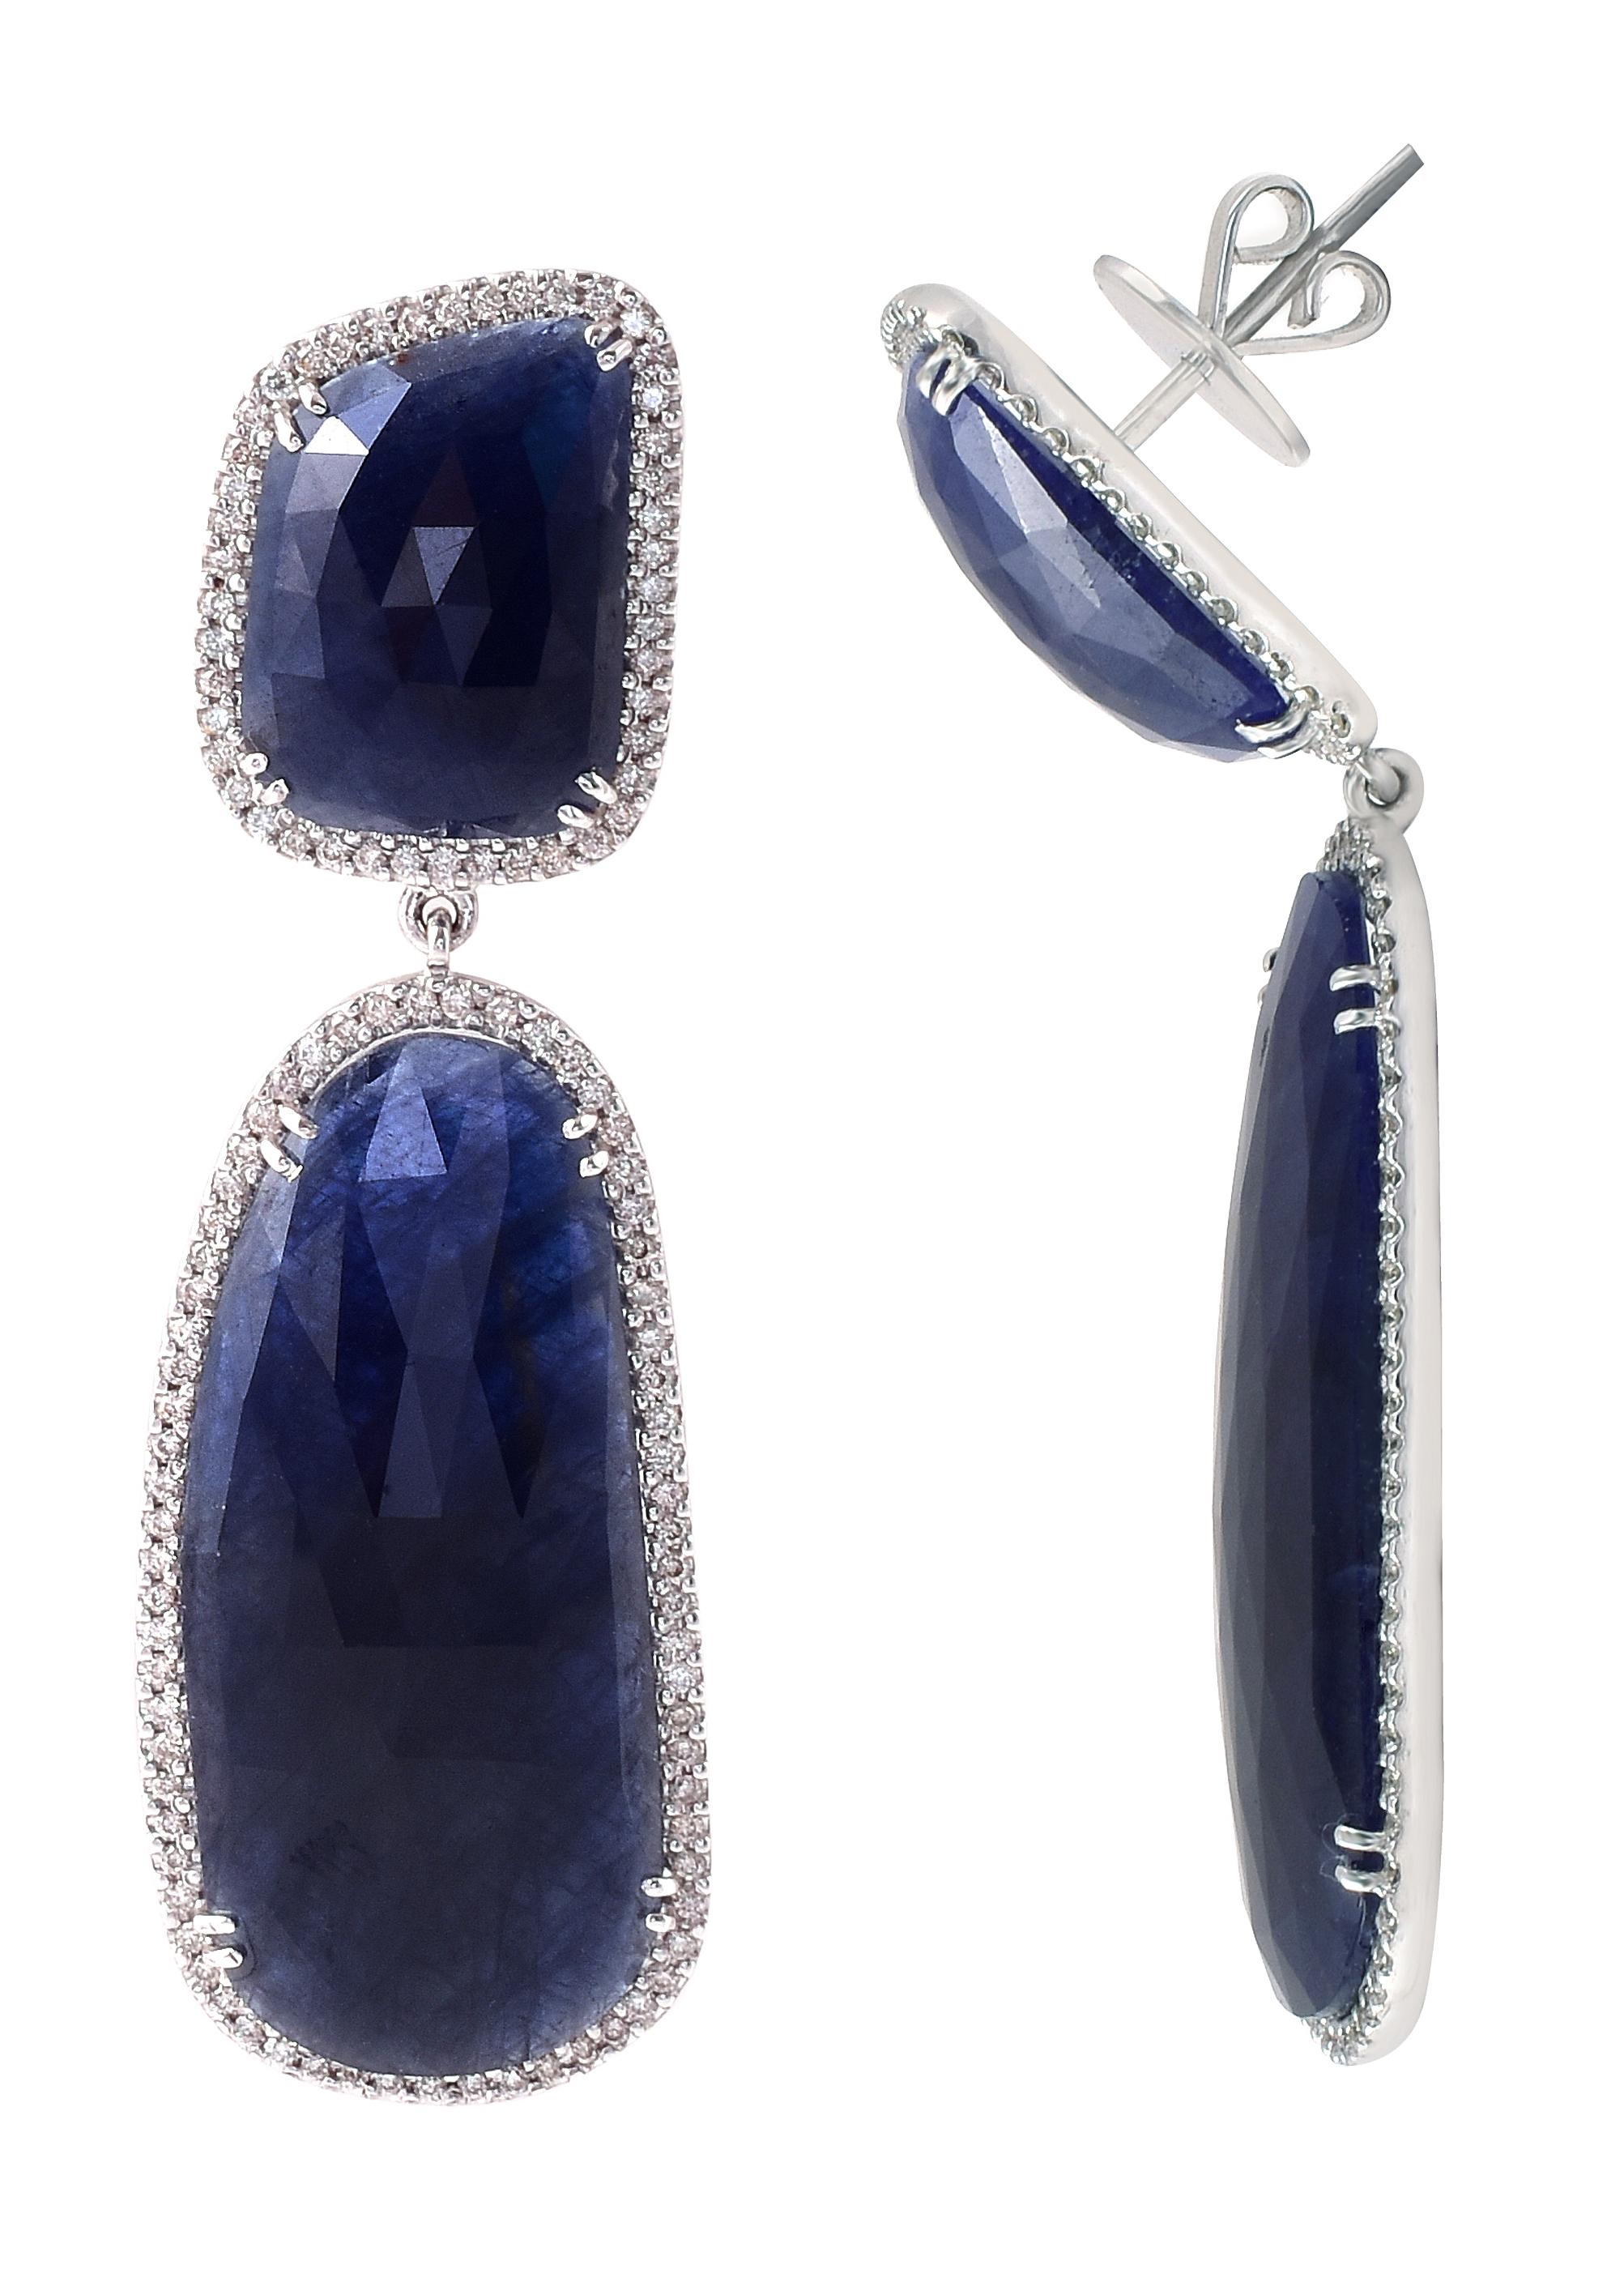 18 Karat White Gold 64.57 Carat Blue Sapphire and Diamond Cocktail Drop Earrings

This incredible cobalt blue sapphire and diamond long slice hanging earring is gorgeous. The solitaire irregular long ovalish-pear cut slice blue sapphire is